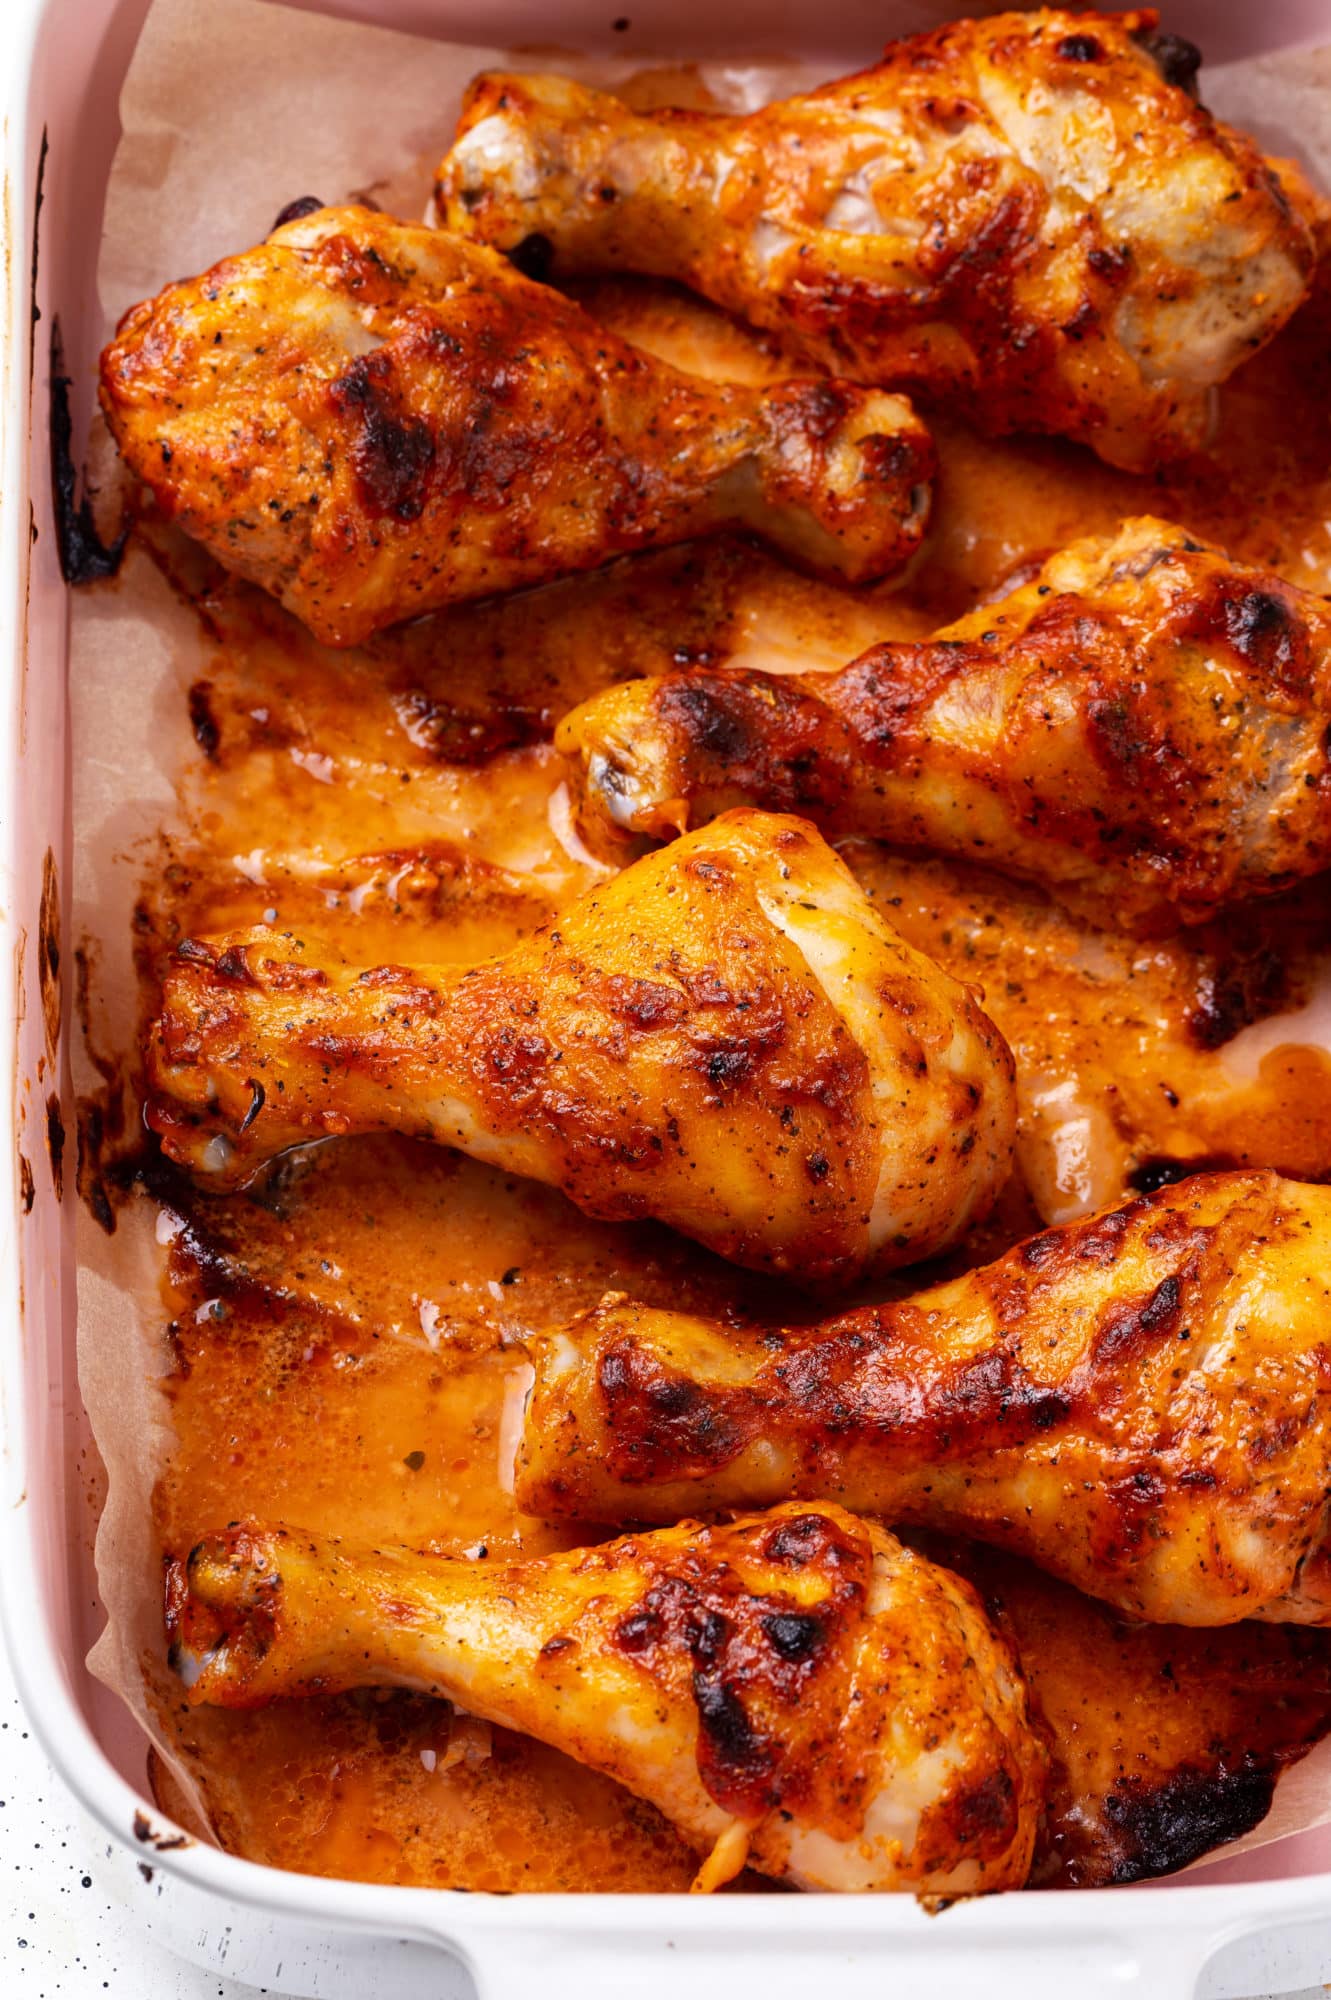 baked-montreal-chicken-on-parchment-paper-in-a-baking-tray